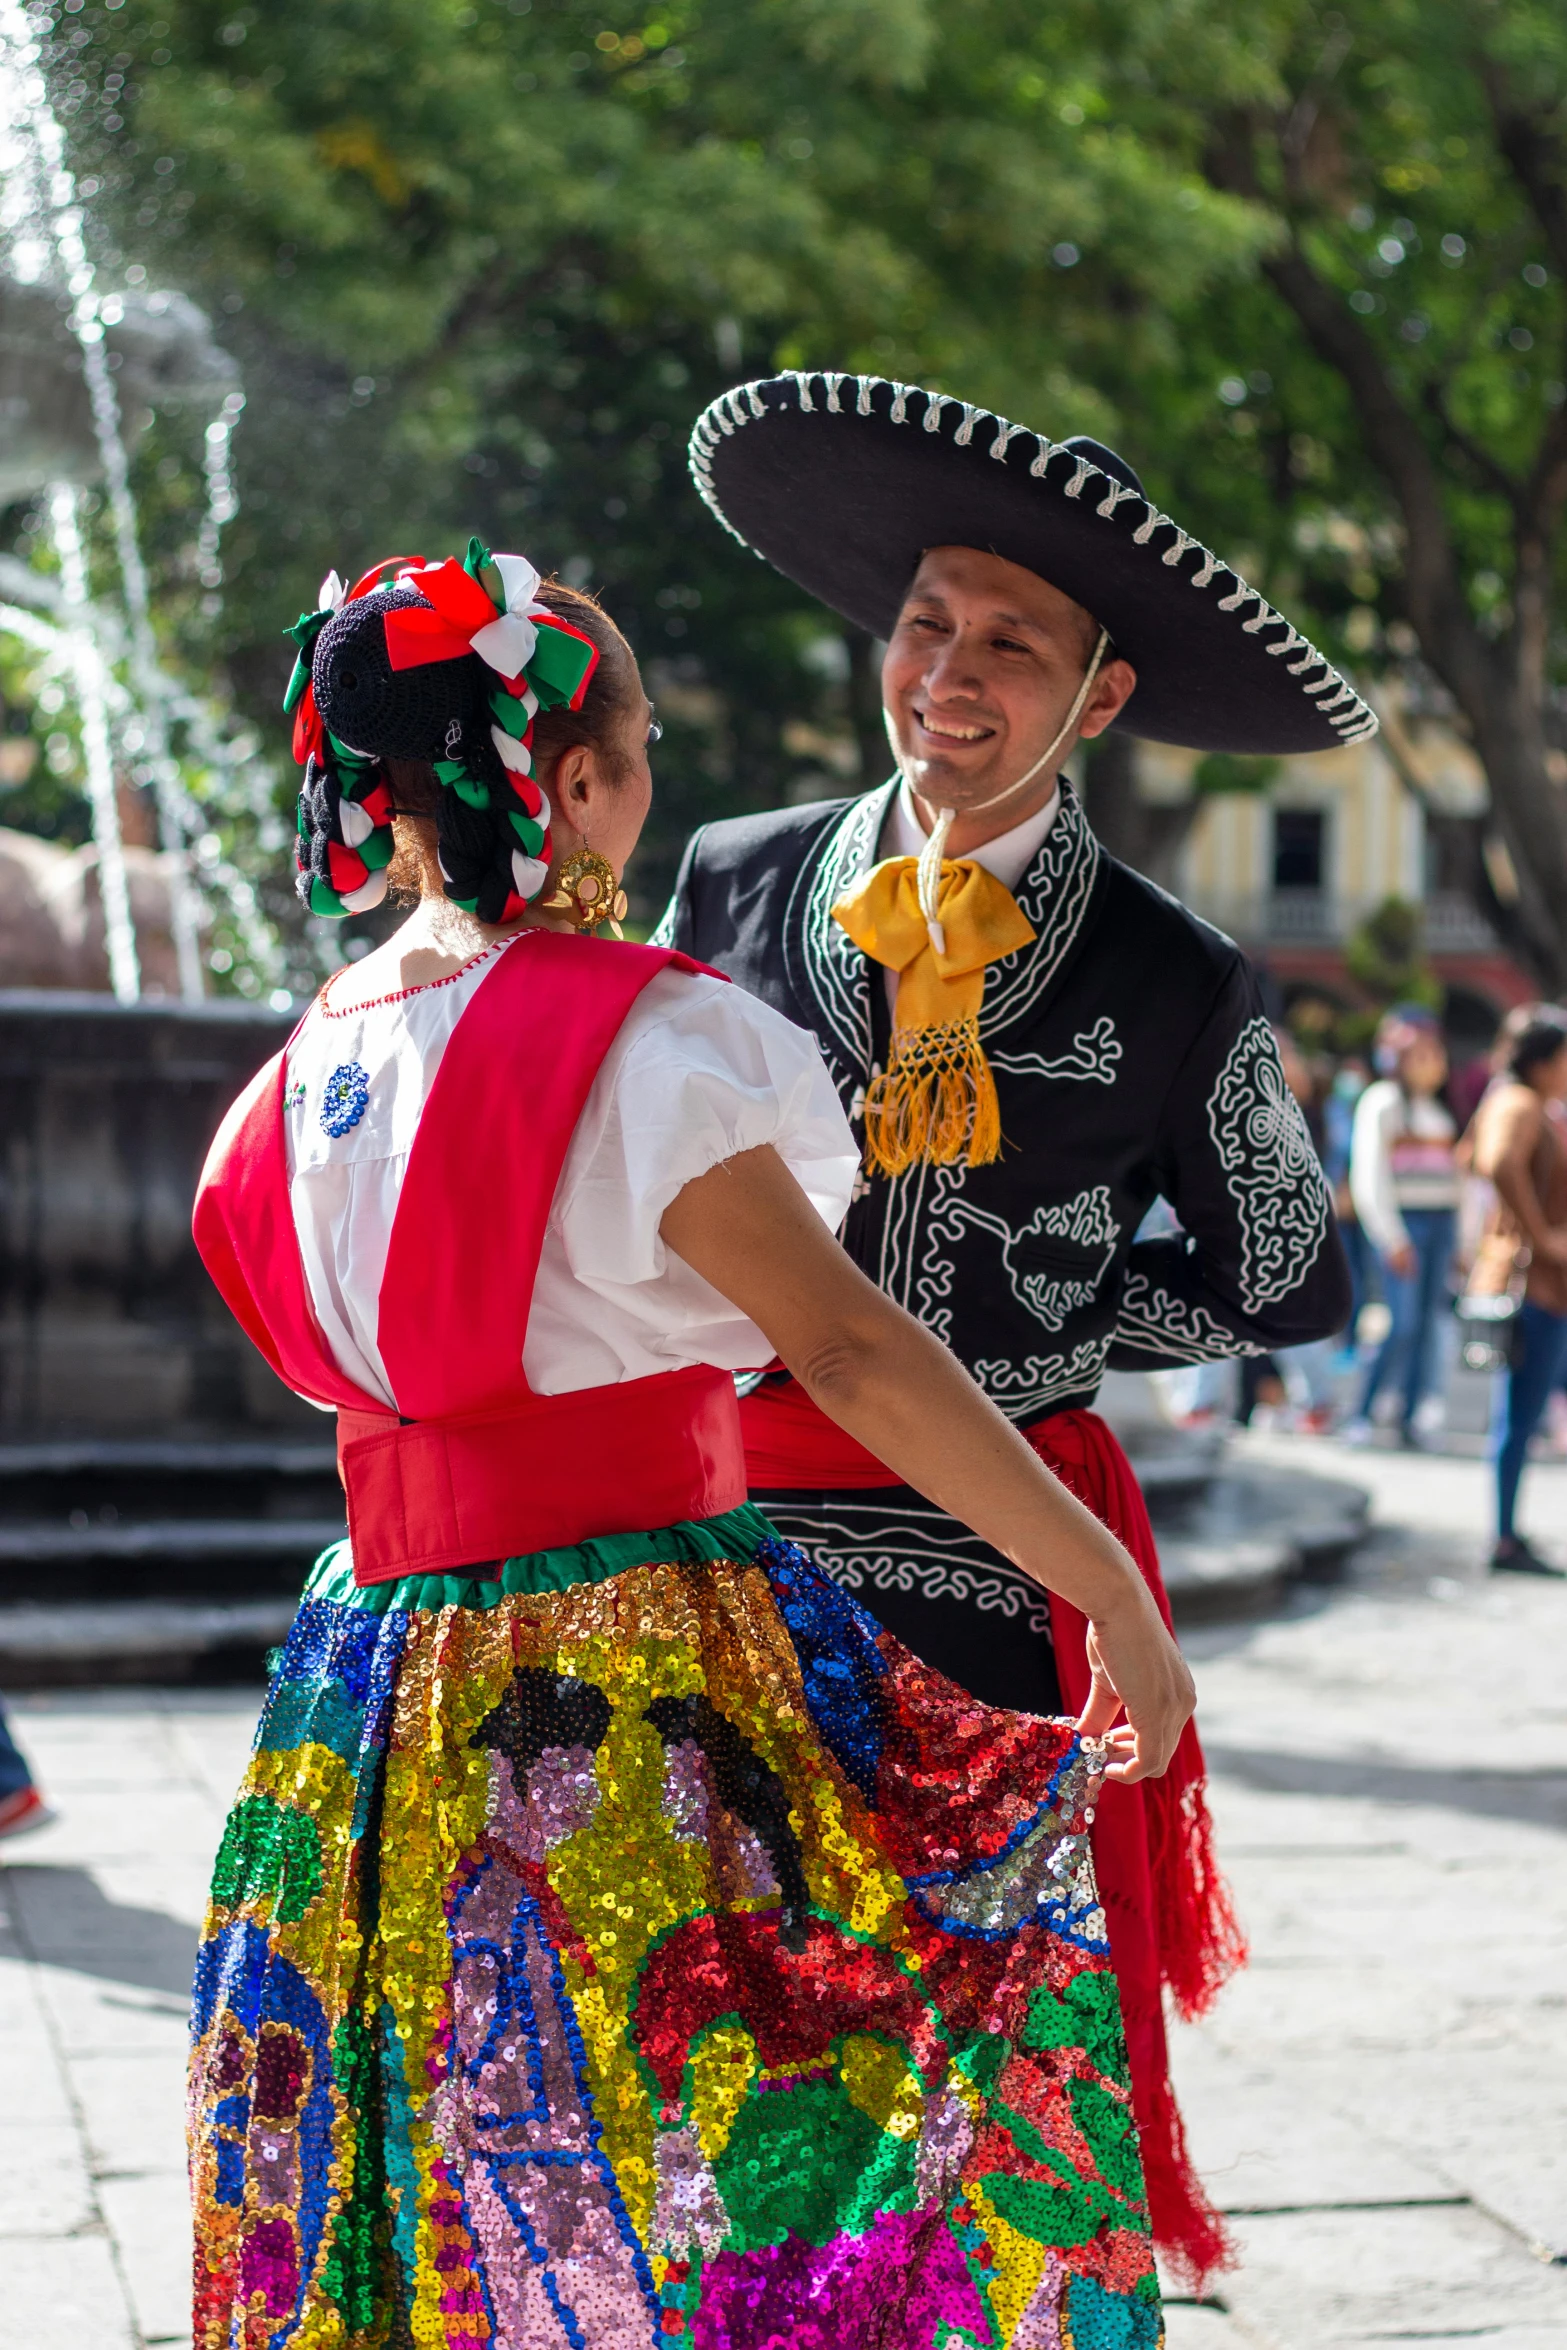 a man in a sombrero walks next to a woman with a large sombrero